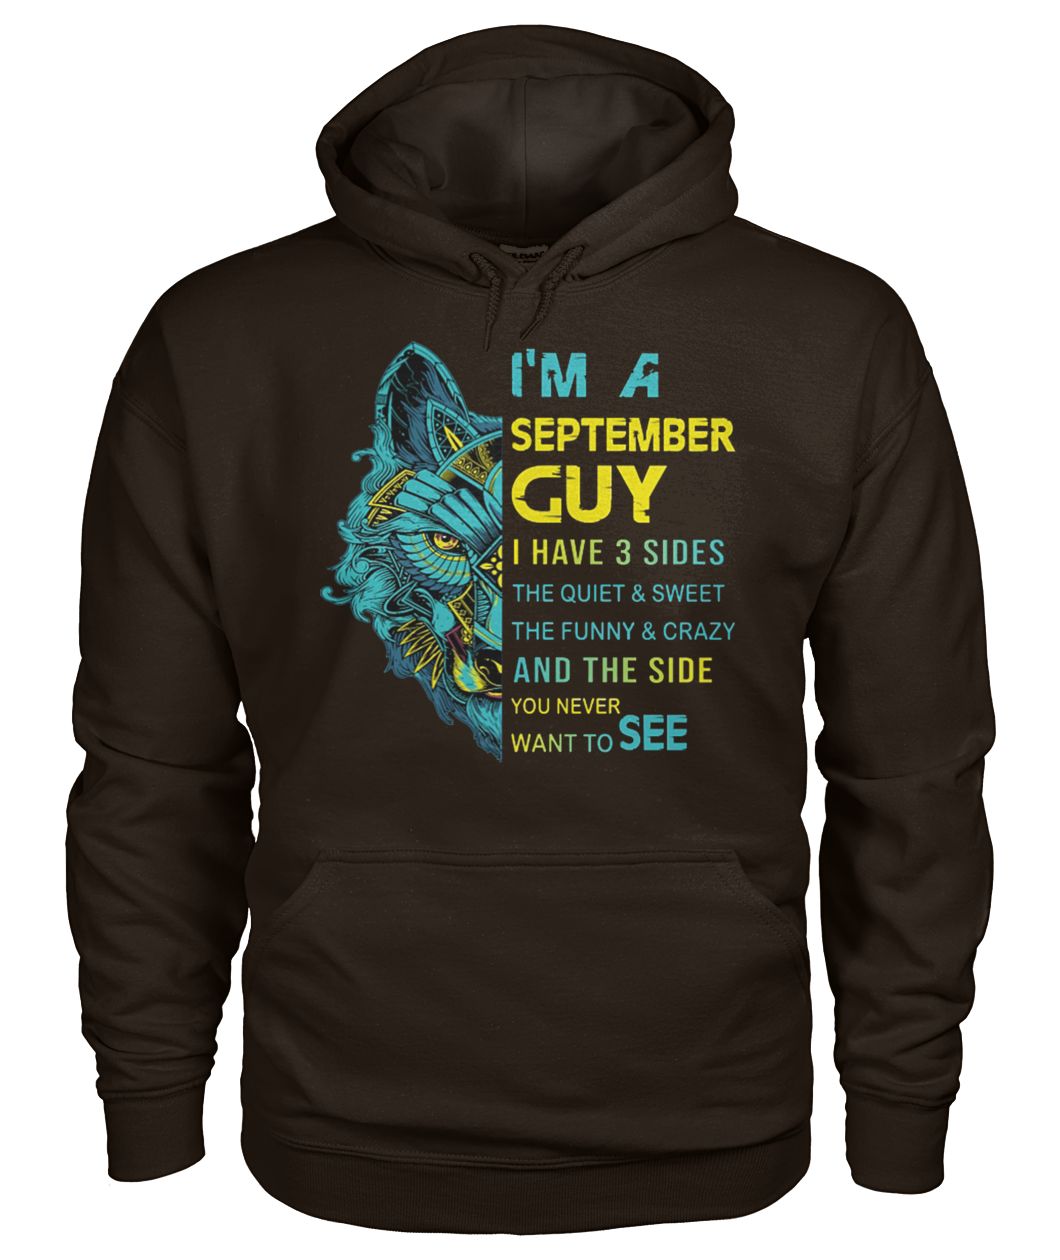 Wolf I’m a september guy I have 3 sides the quiet and sweet the funny and crazy gildan hoodie